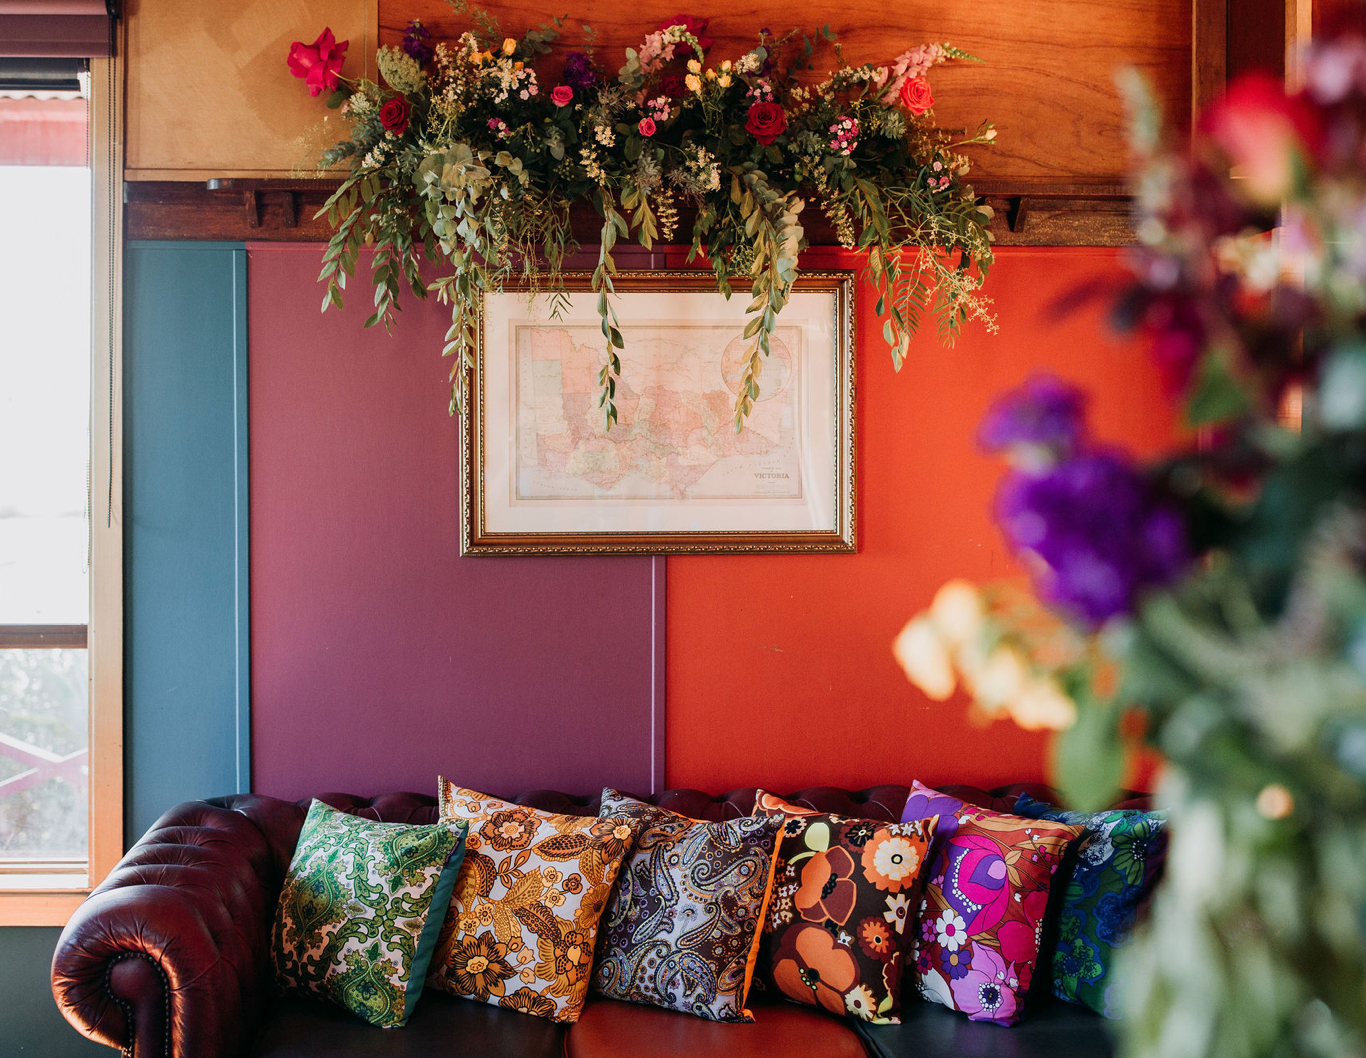 Inside colourful farm house interior with couch and decorative florals.